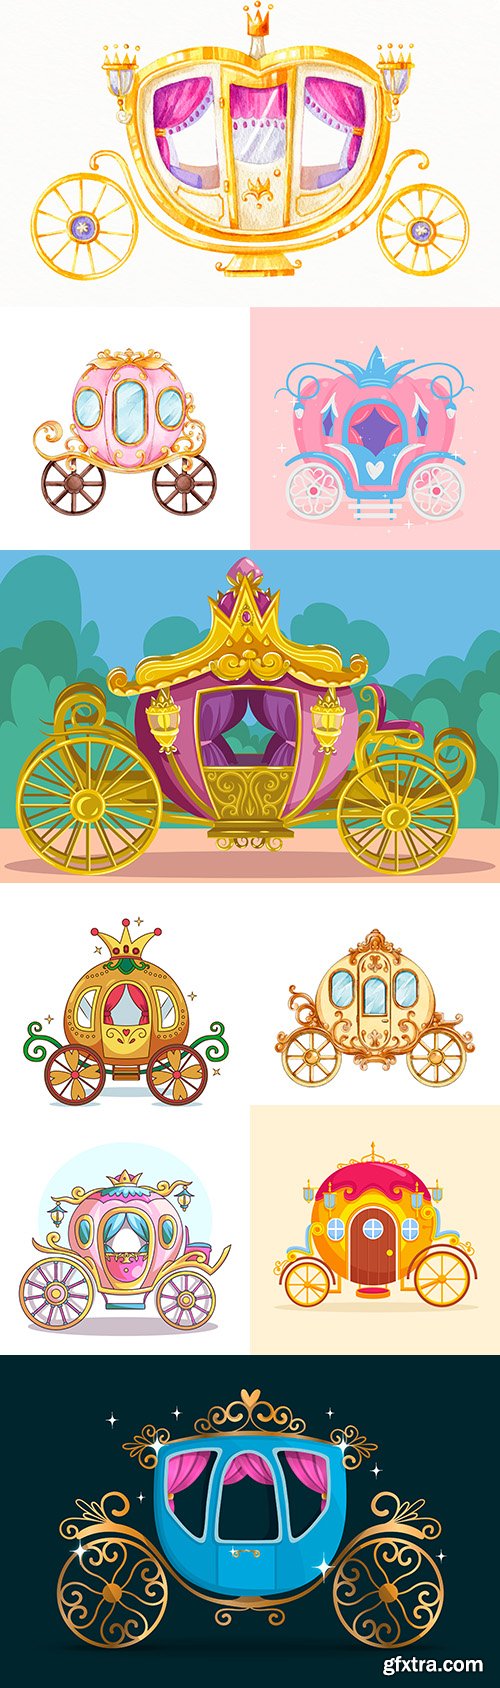 Fabulous carriage for princess collection illustrations